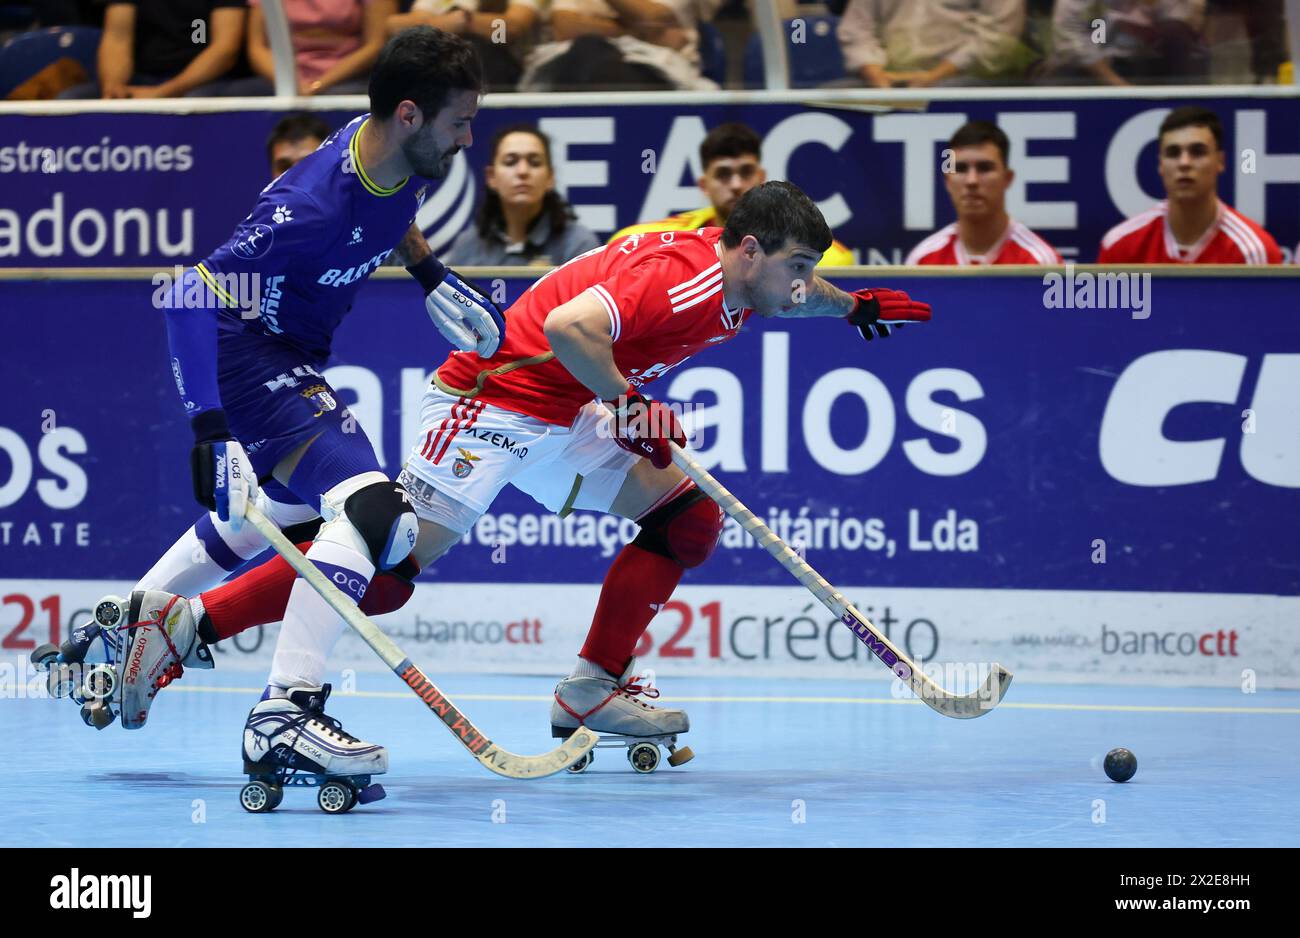 Barcelos, 04/20/2024 - Óquei Clube de Barcelos faced Sport Lisboa and Benfica this evening in the 24th round of the 2023/24 National Roller Hockey Championship. The game was played at the Barcelos Municipal Pavilion. Miguel Rocha (OC Barcelos); Lucas Ordóñez (SL Benfica) (Global Imagens) Stock Photo